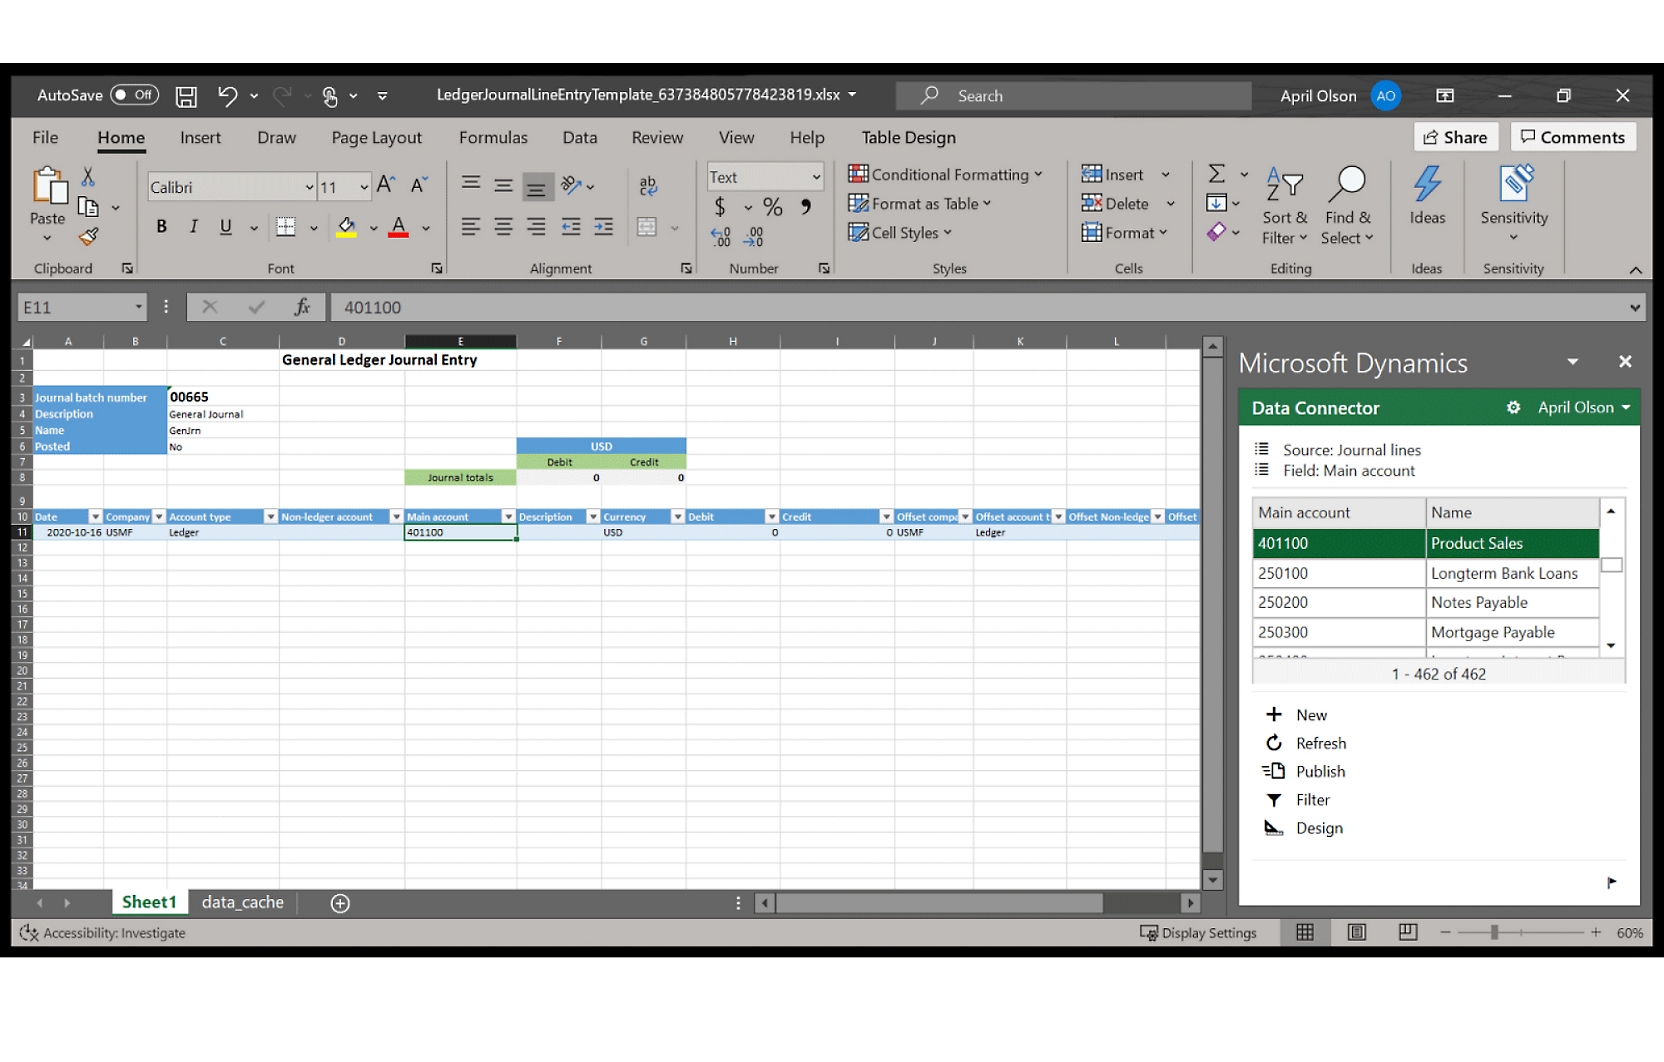 A screen shot of the Microsoft excel spreadsheet.